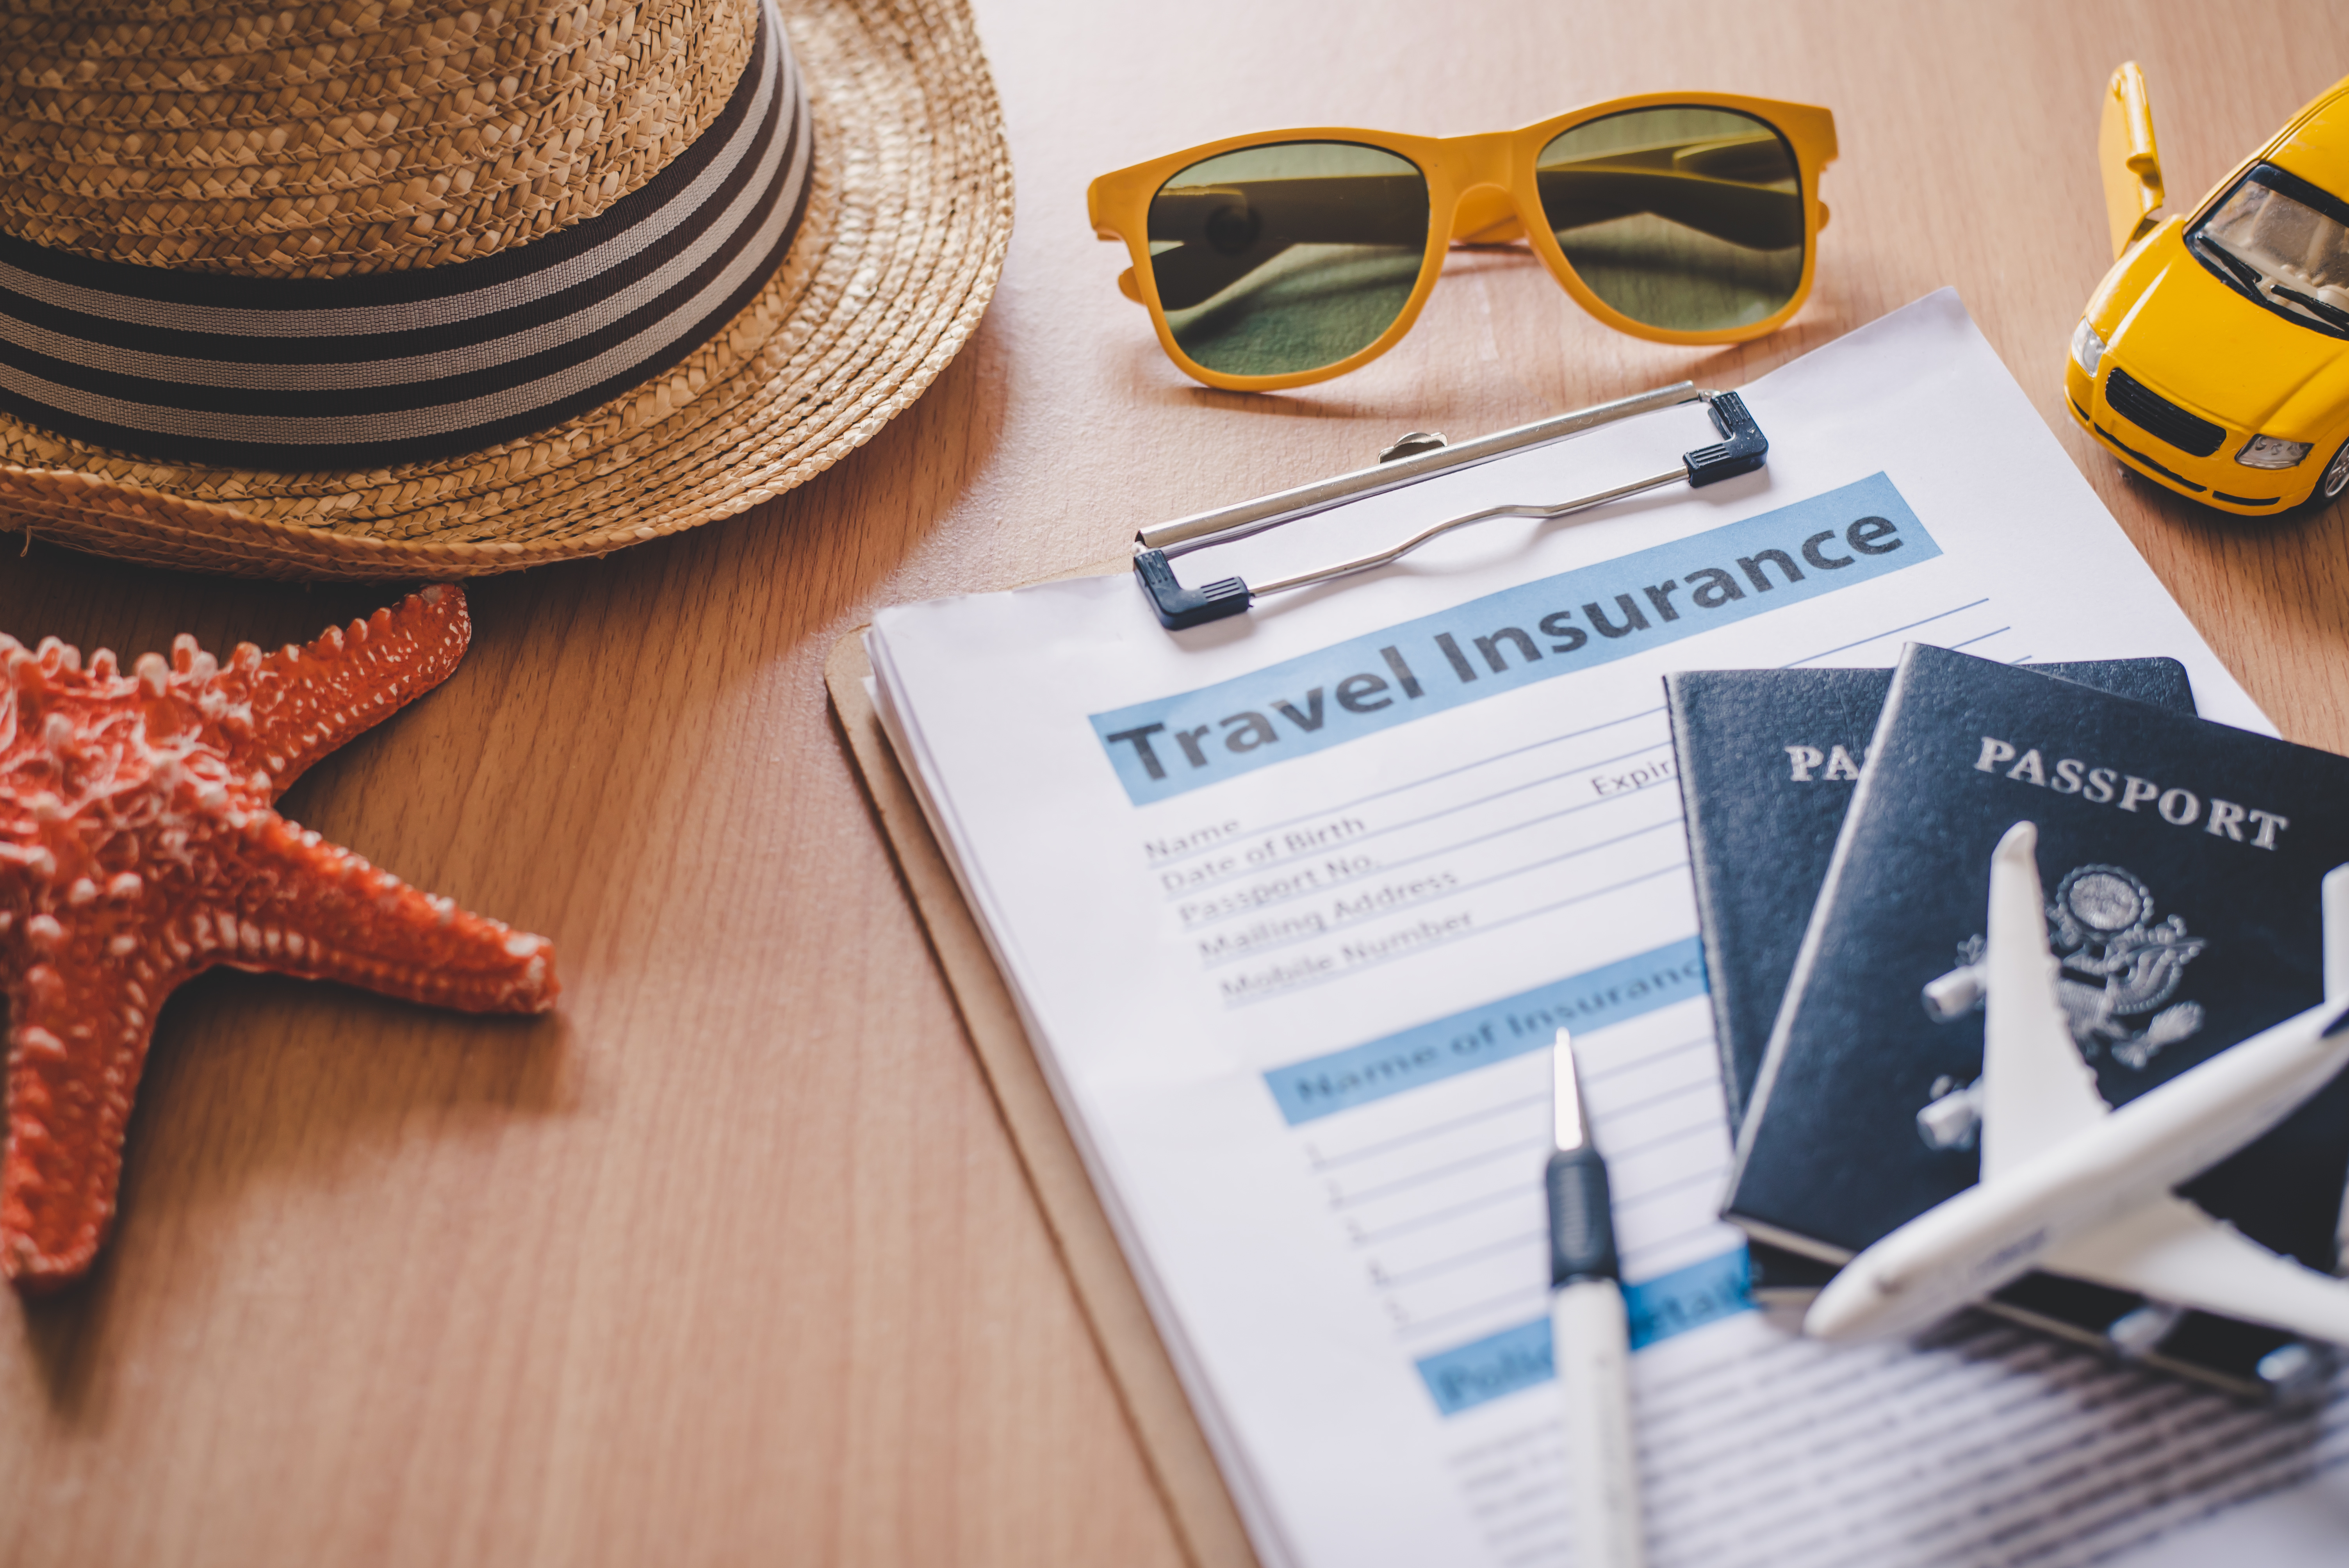 Travel insurance form with passport and various vacation items